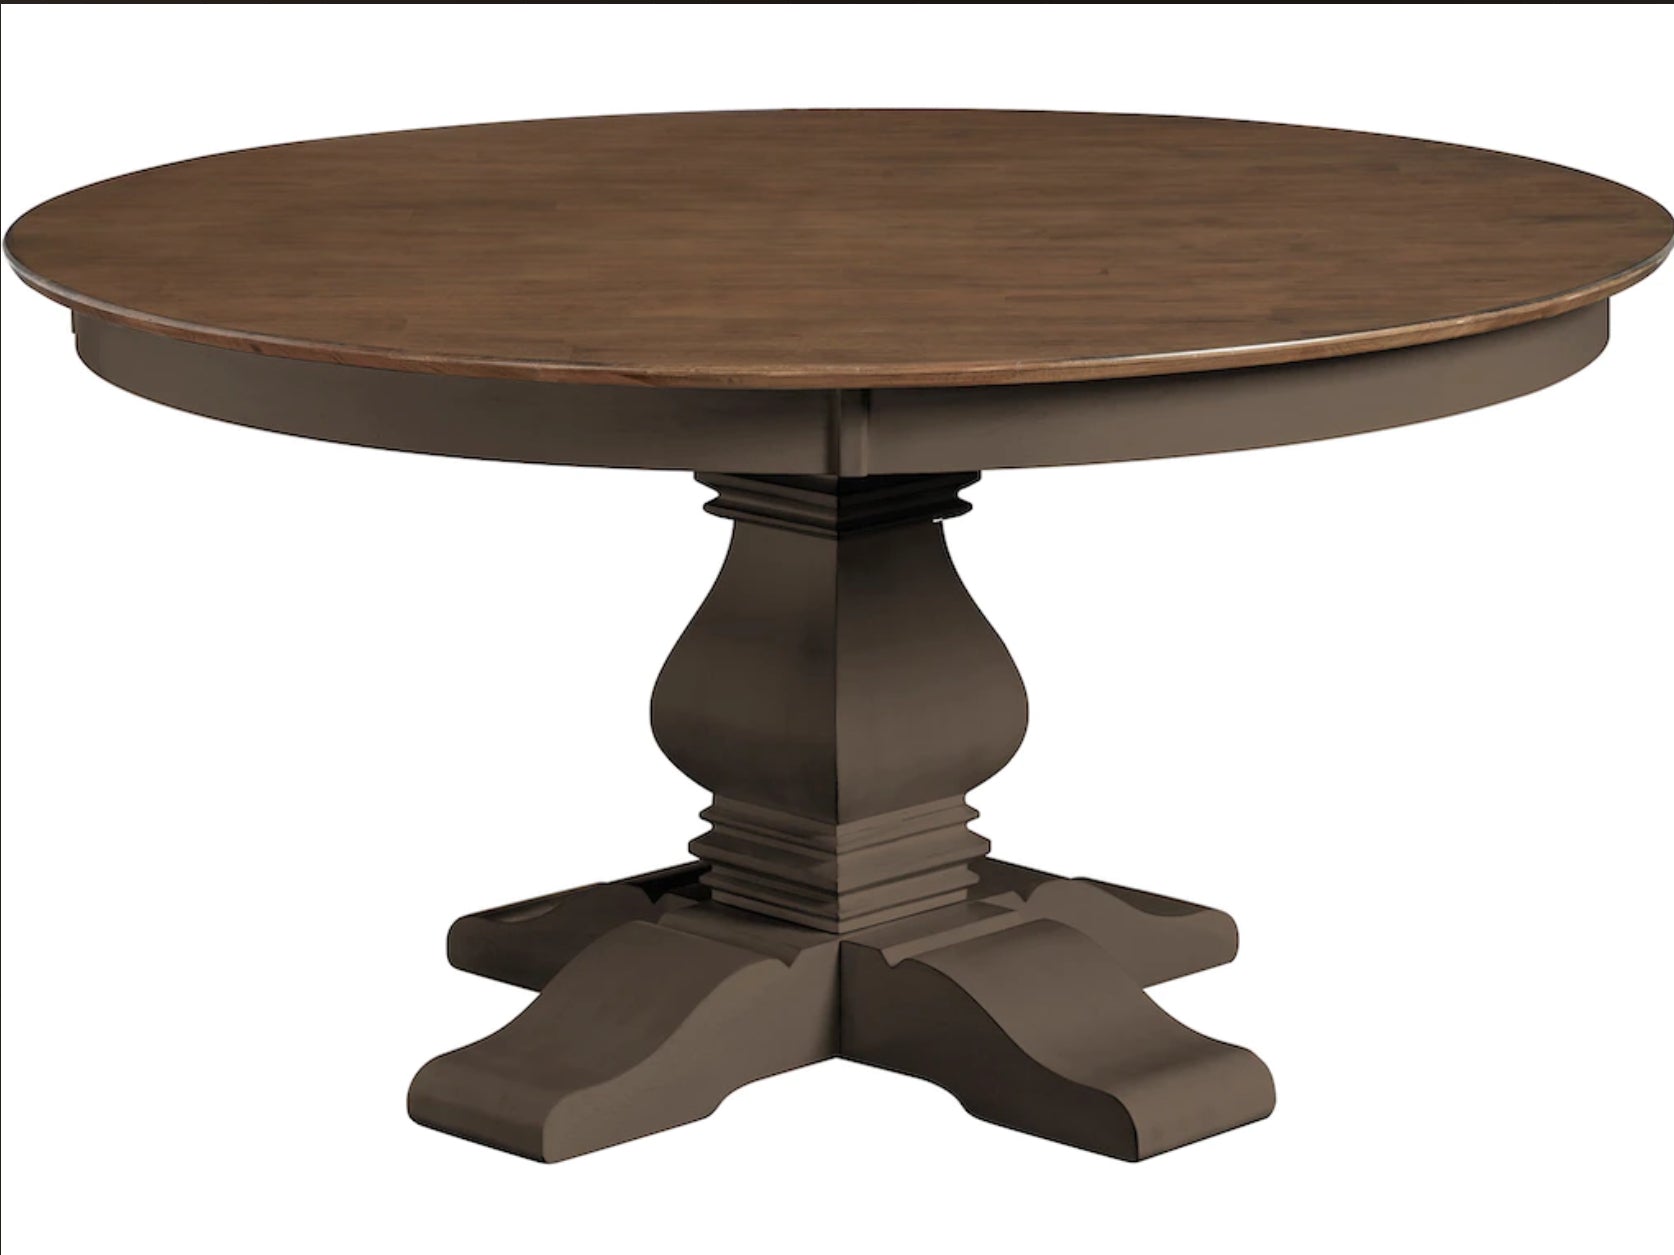 The Round Foreside Farm Table